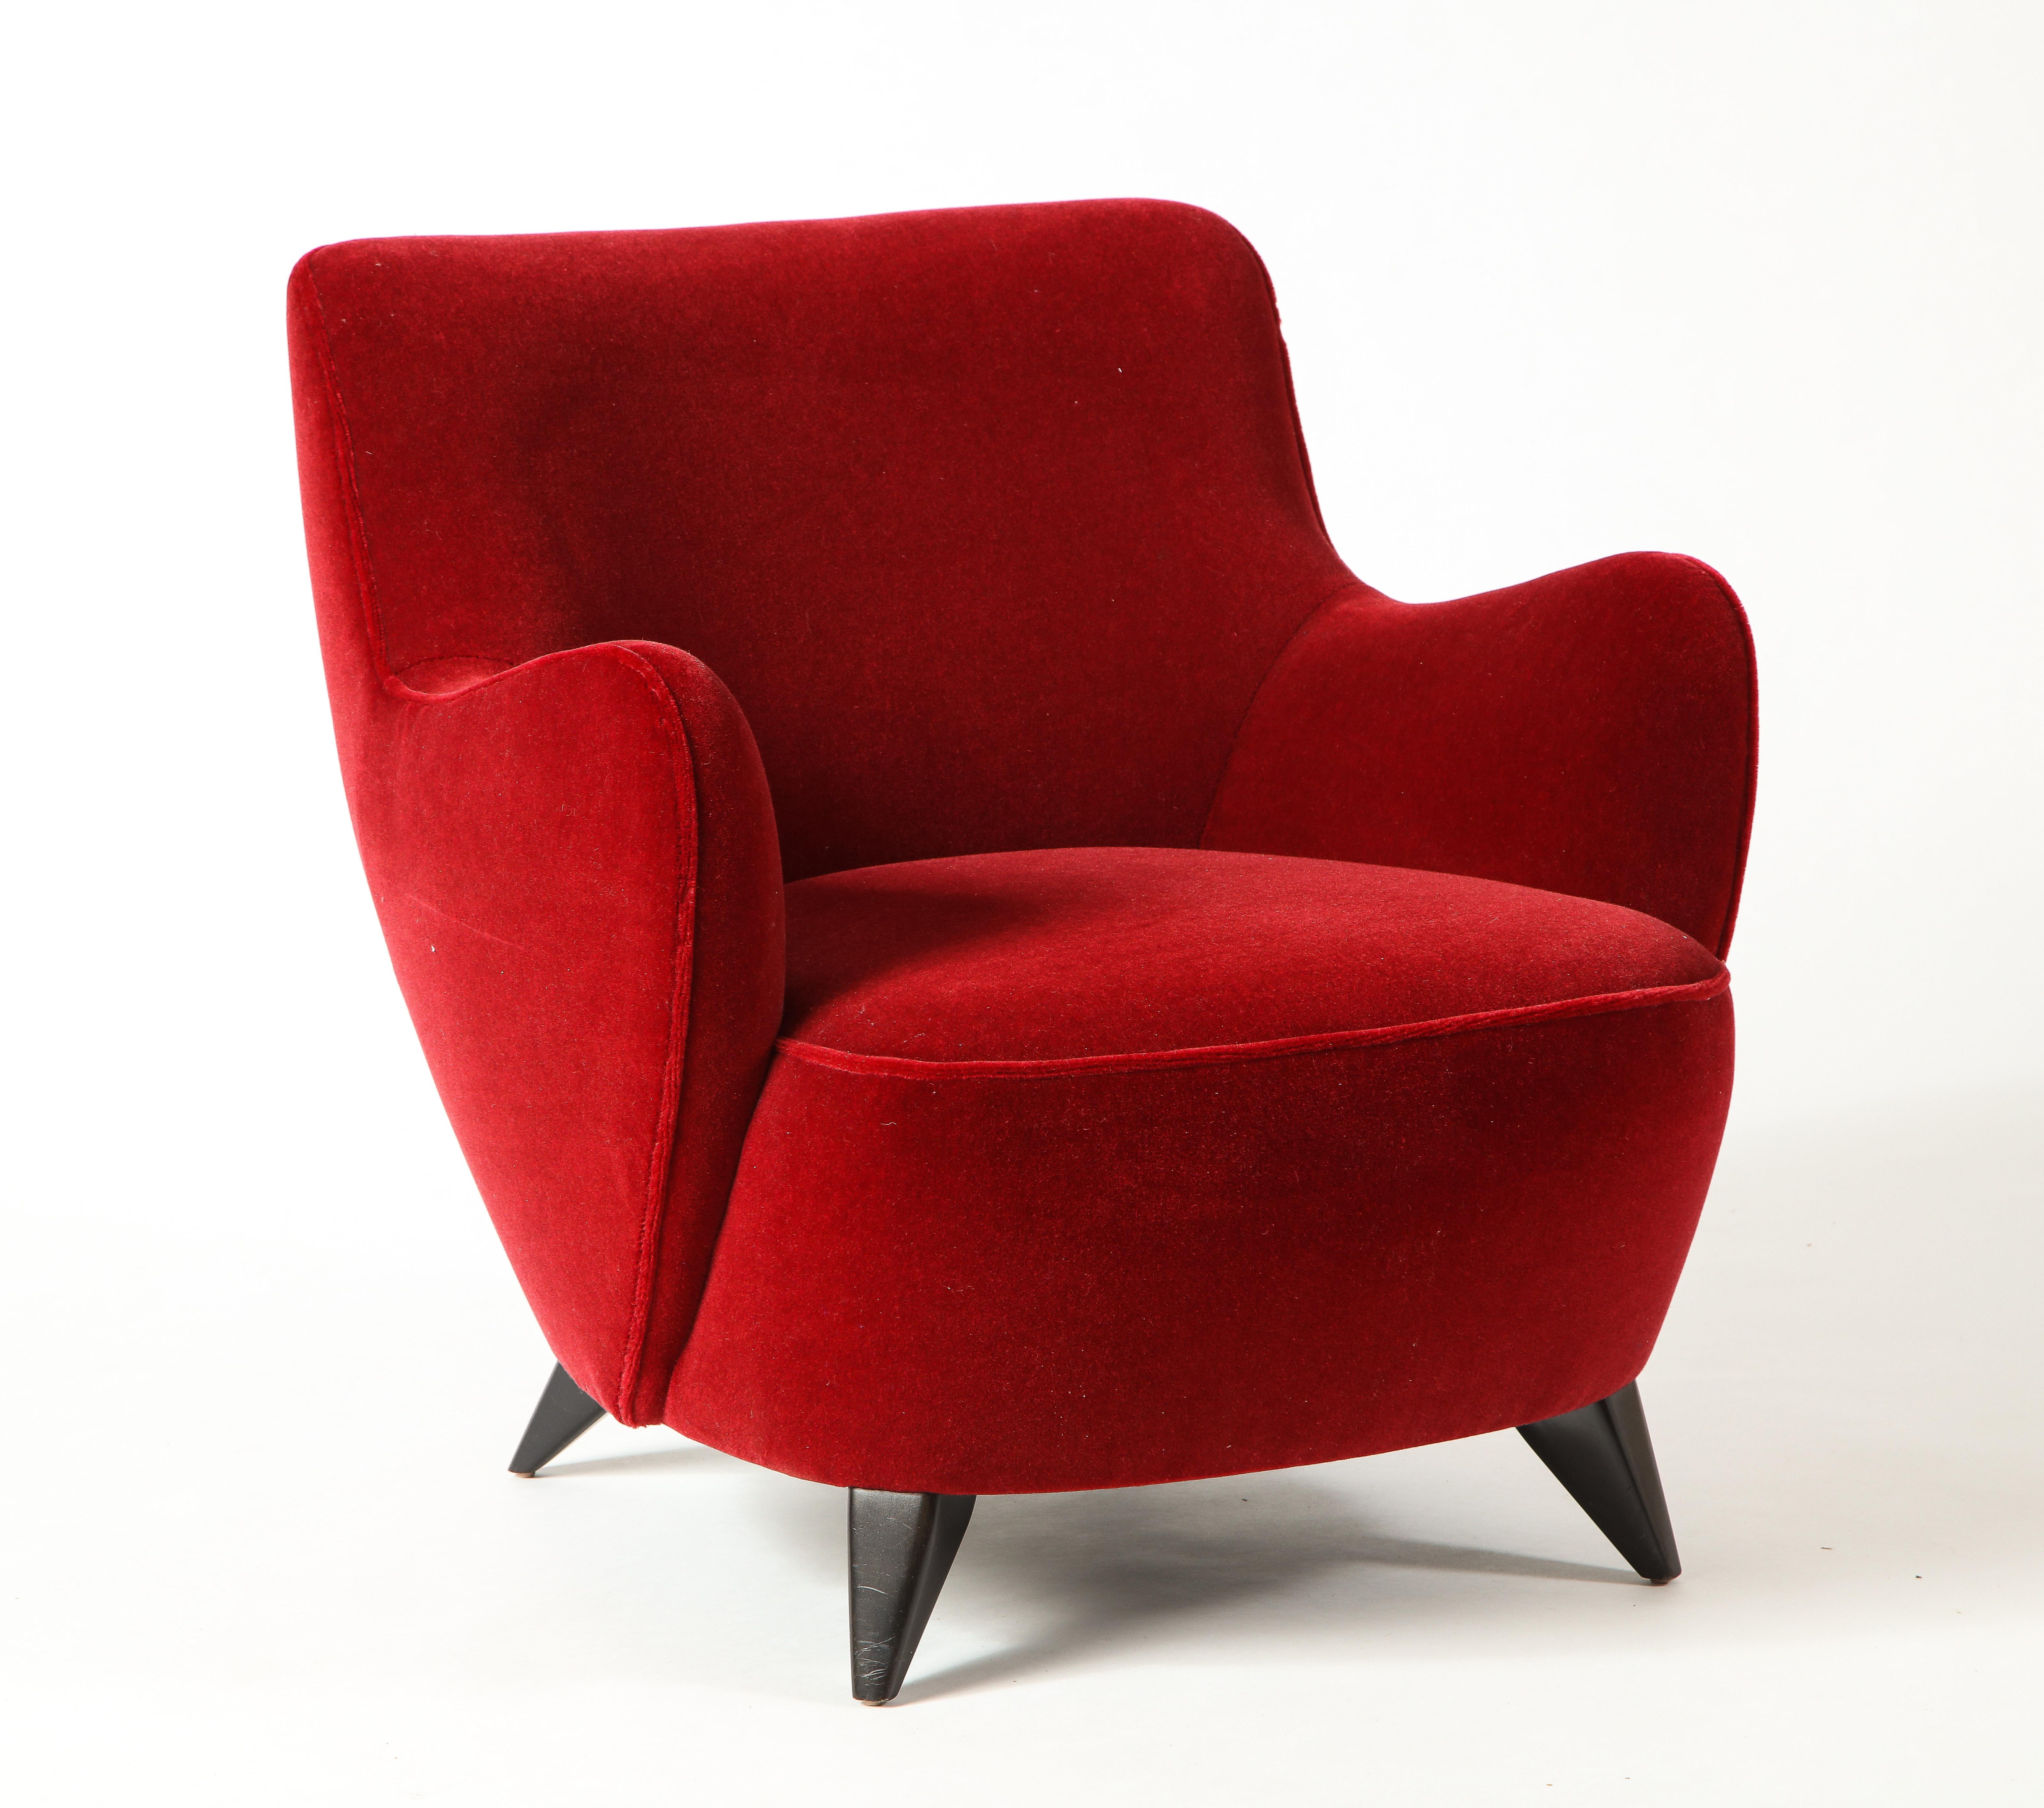 Vladimir Kagan Barrel Chair in Red Mohair Upholstery with Ebony Base 3